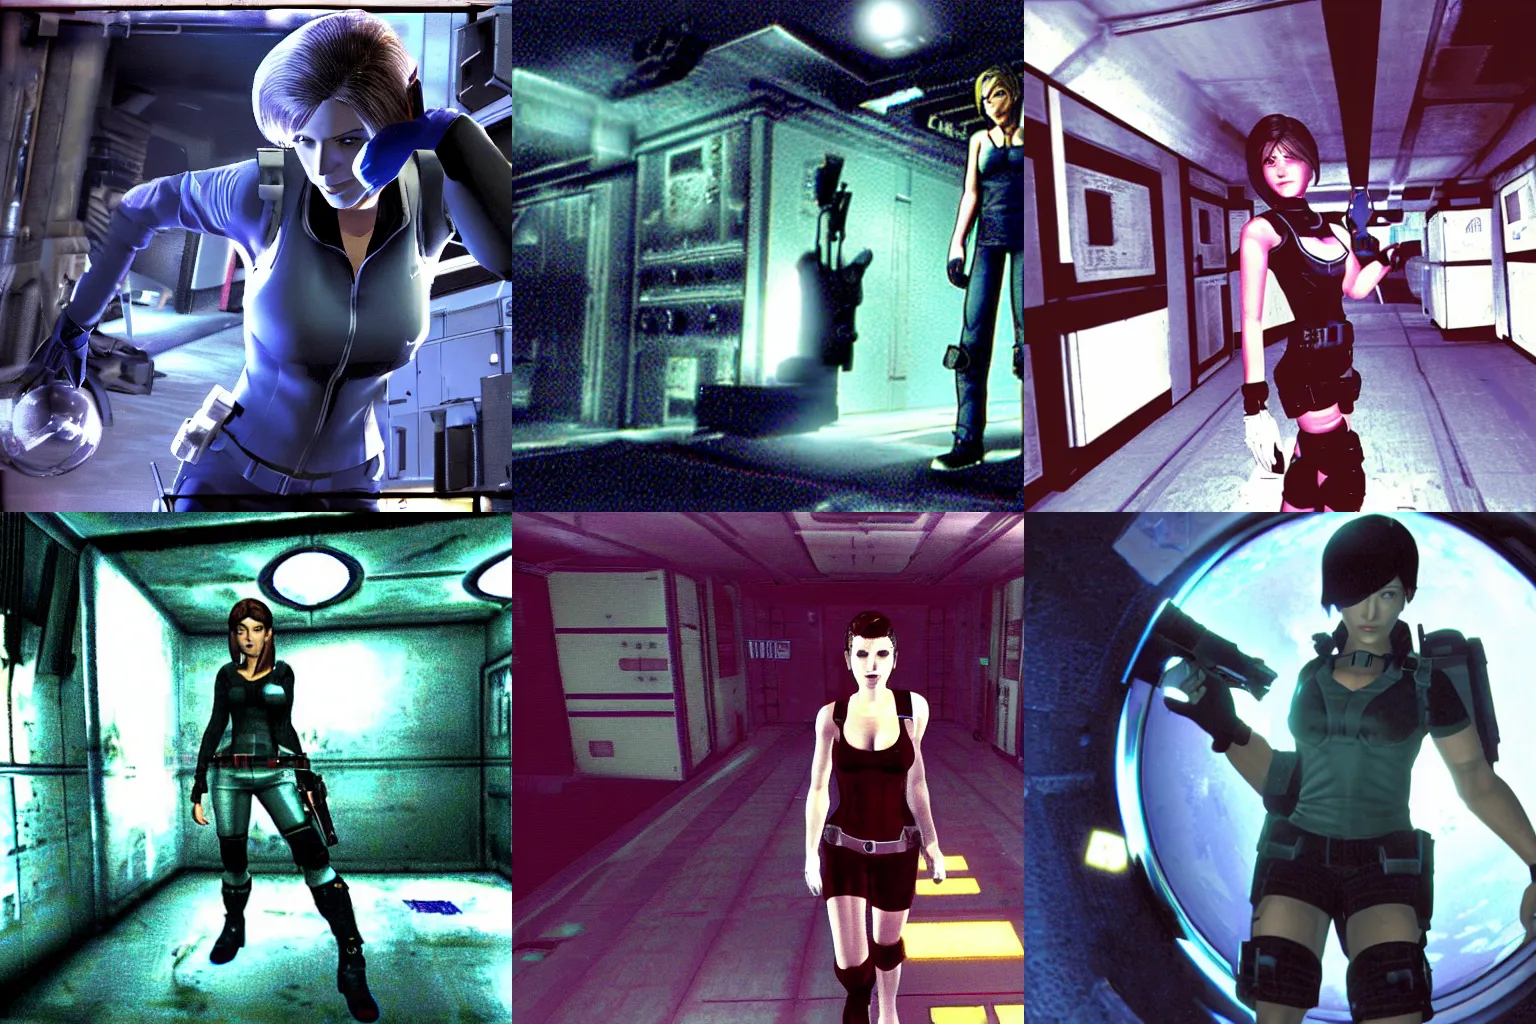 Prompt: Jill Valentine from the video game Resident Evil. She is wearing a S.T.A.R.S outfit. She is walking in a space station. evil, dark and scary atmosphere. Dreamcast survival horror game screenshot.